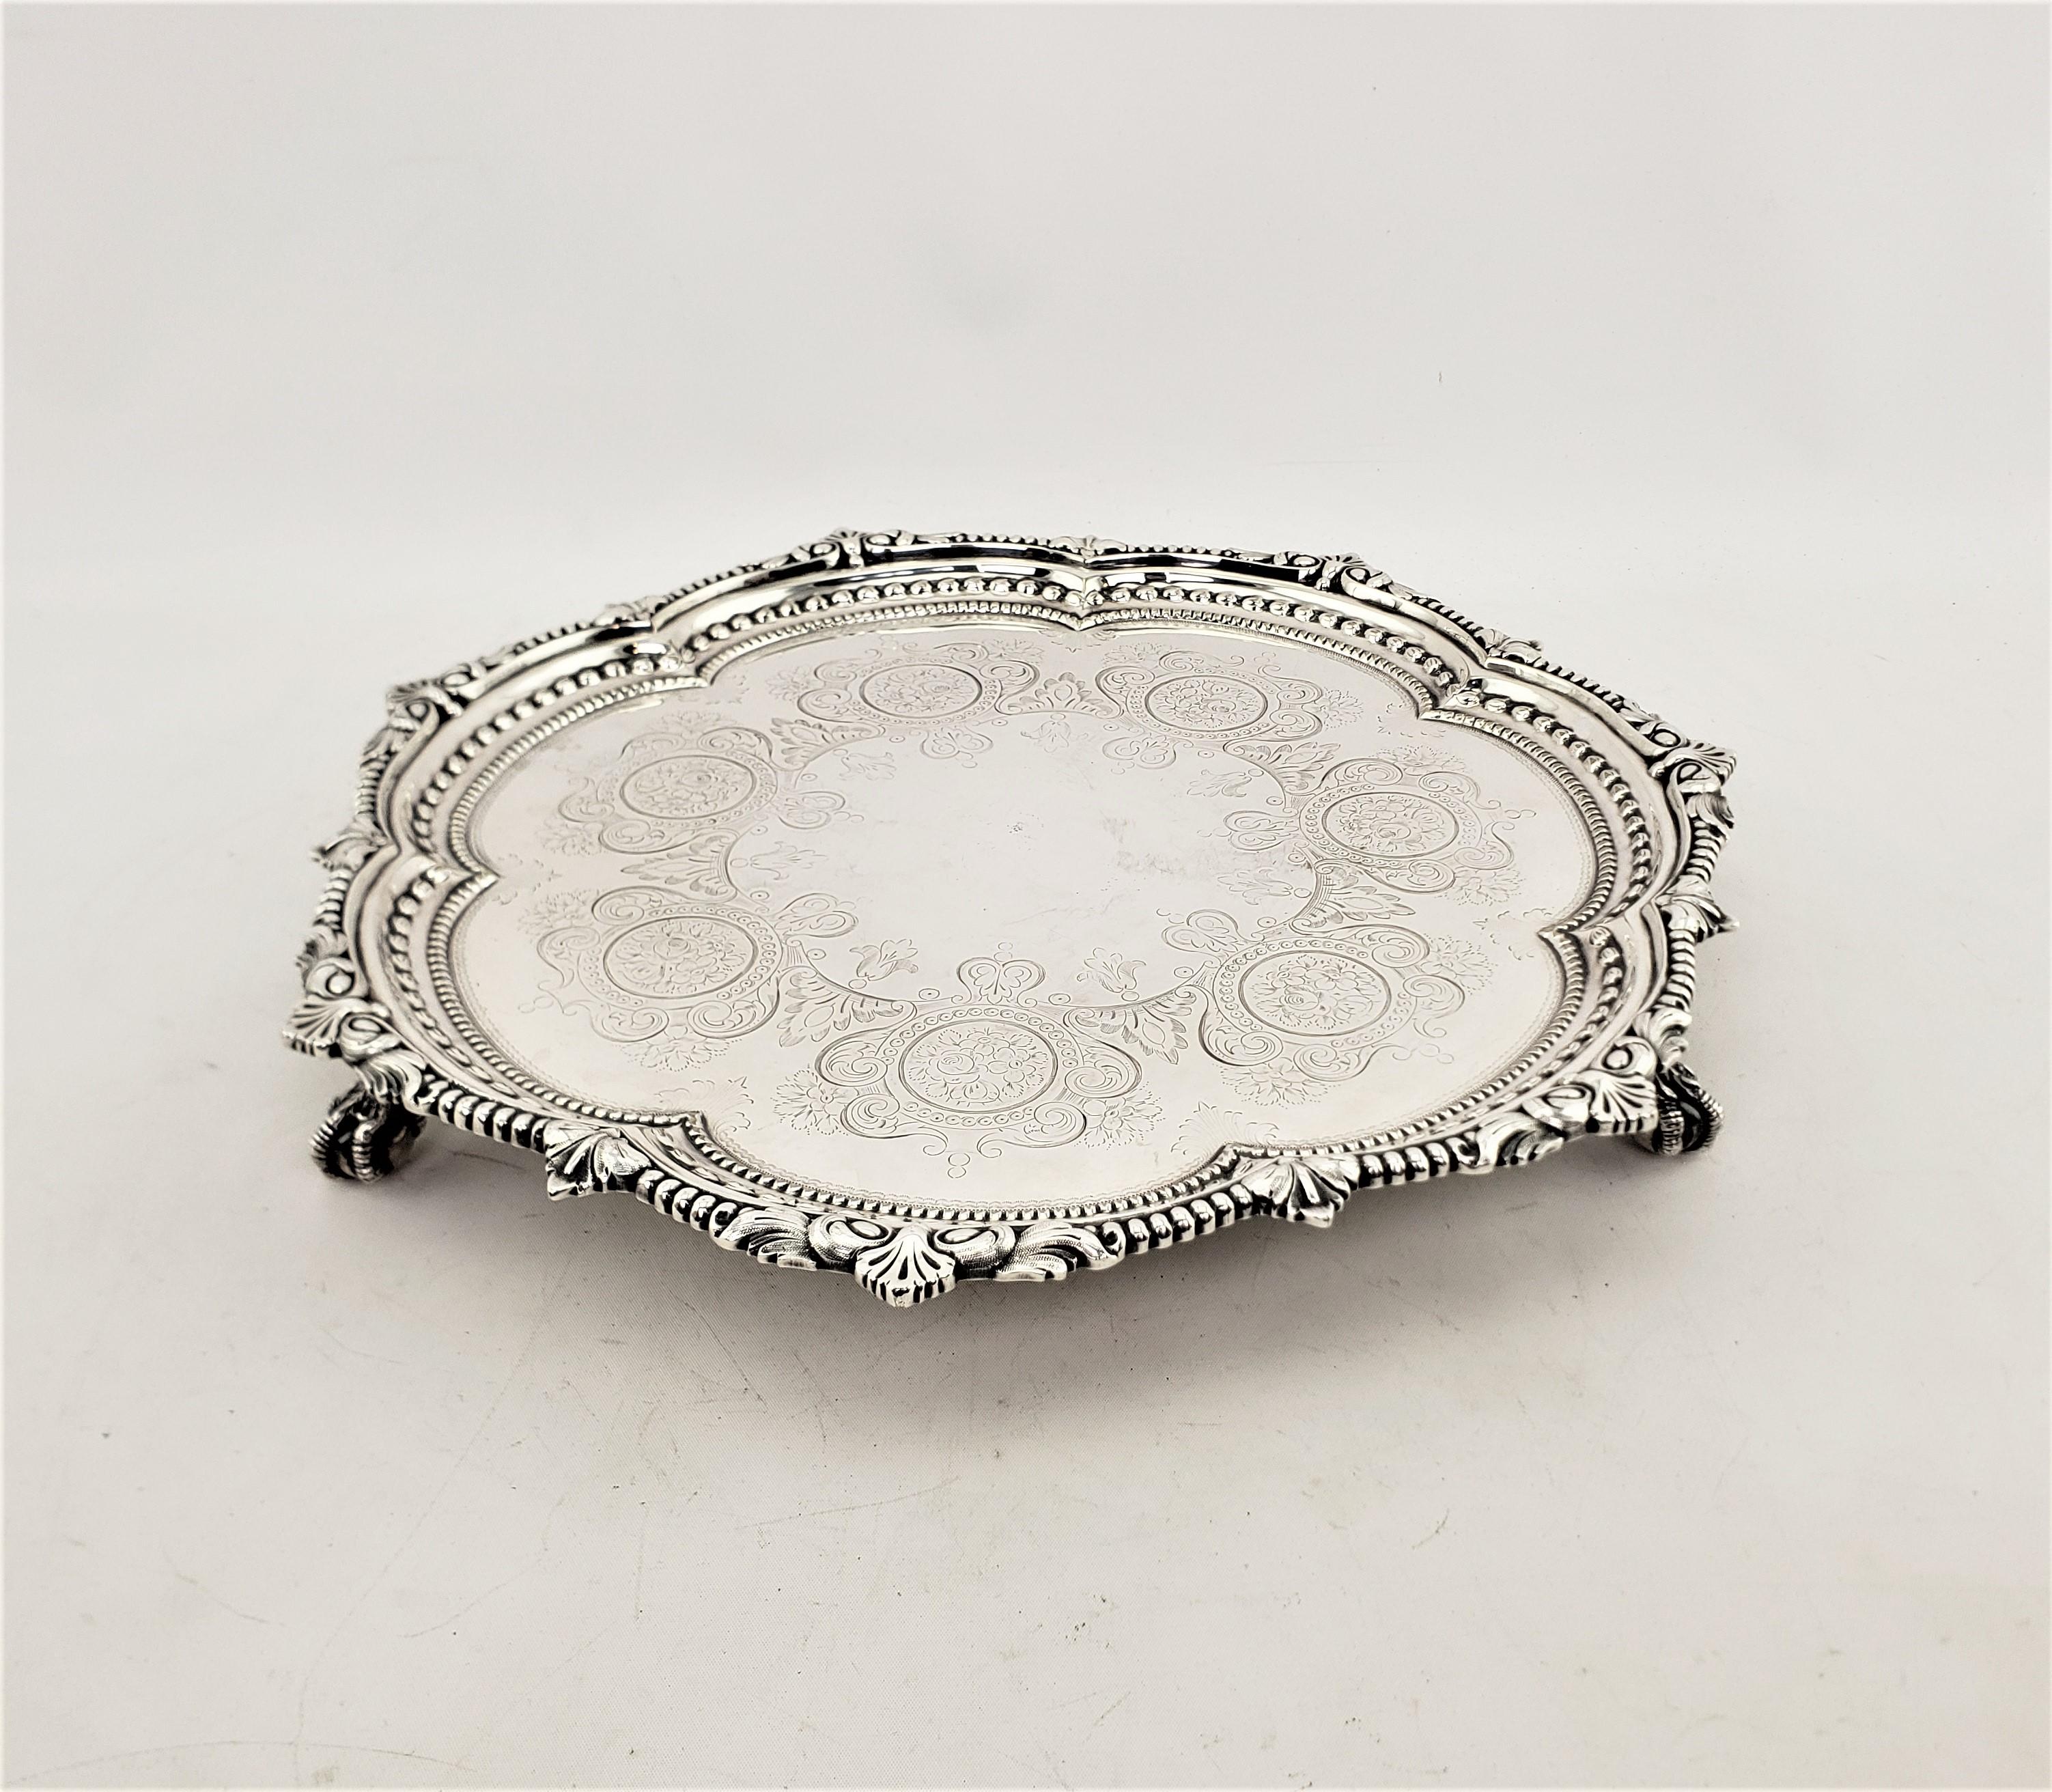 This antique silver plated serving tray is hallmarked by an unknown maker, and presumed to have originated from England and date to approximately 1920 and done in a Victorian style. This silver plated serving tray is scalloped shaped with layers of